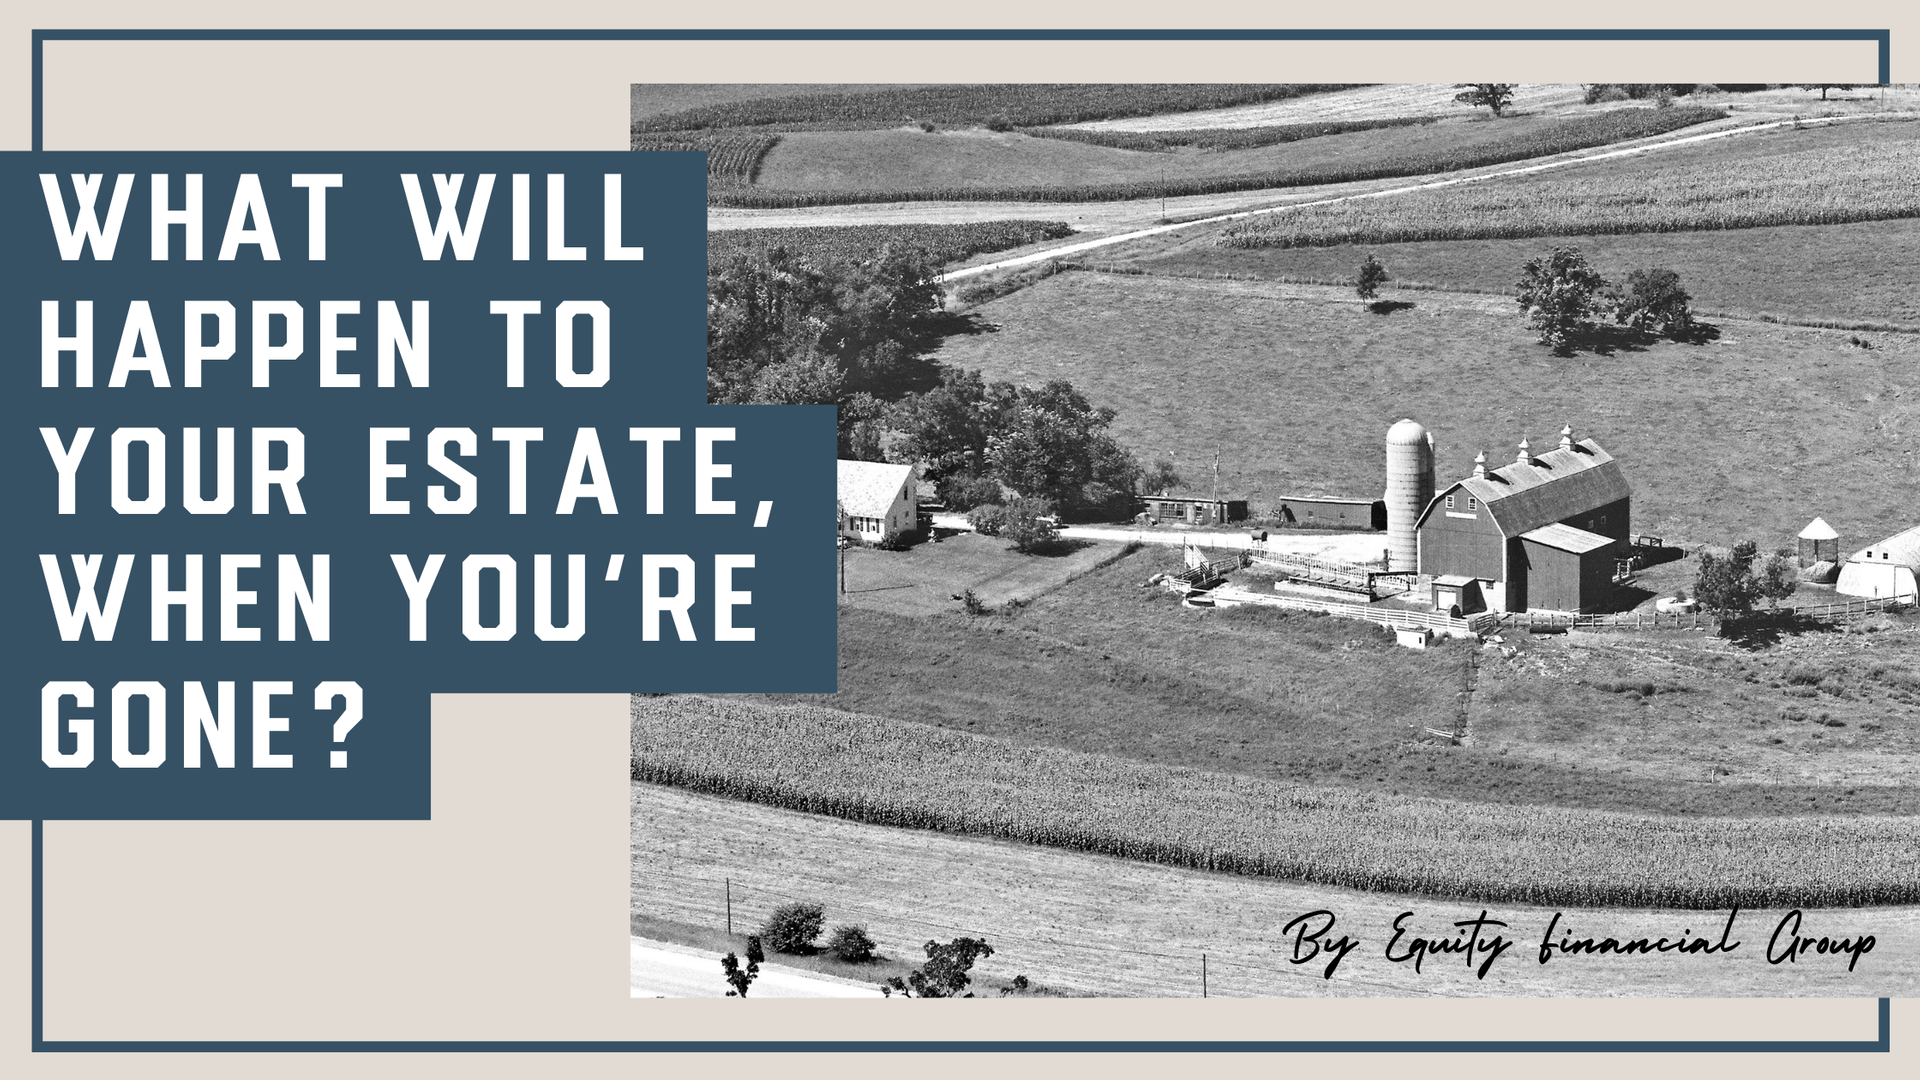 what-will-happen-to-your-estate-when-you-are-gone-equity-financial-group-enid-oklahoma-estate-plan-avoid-probate